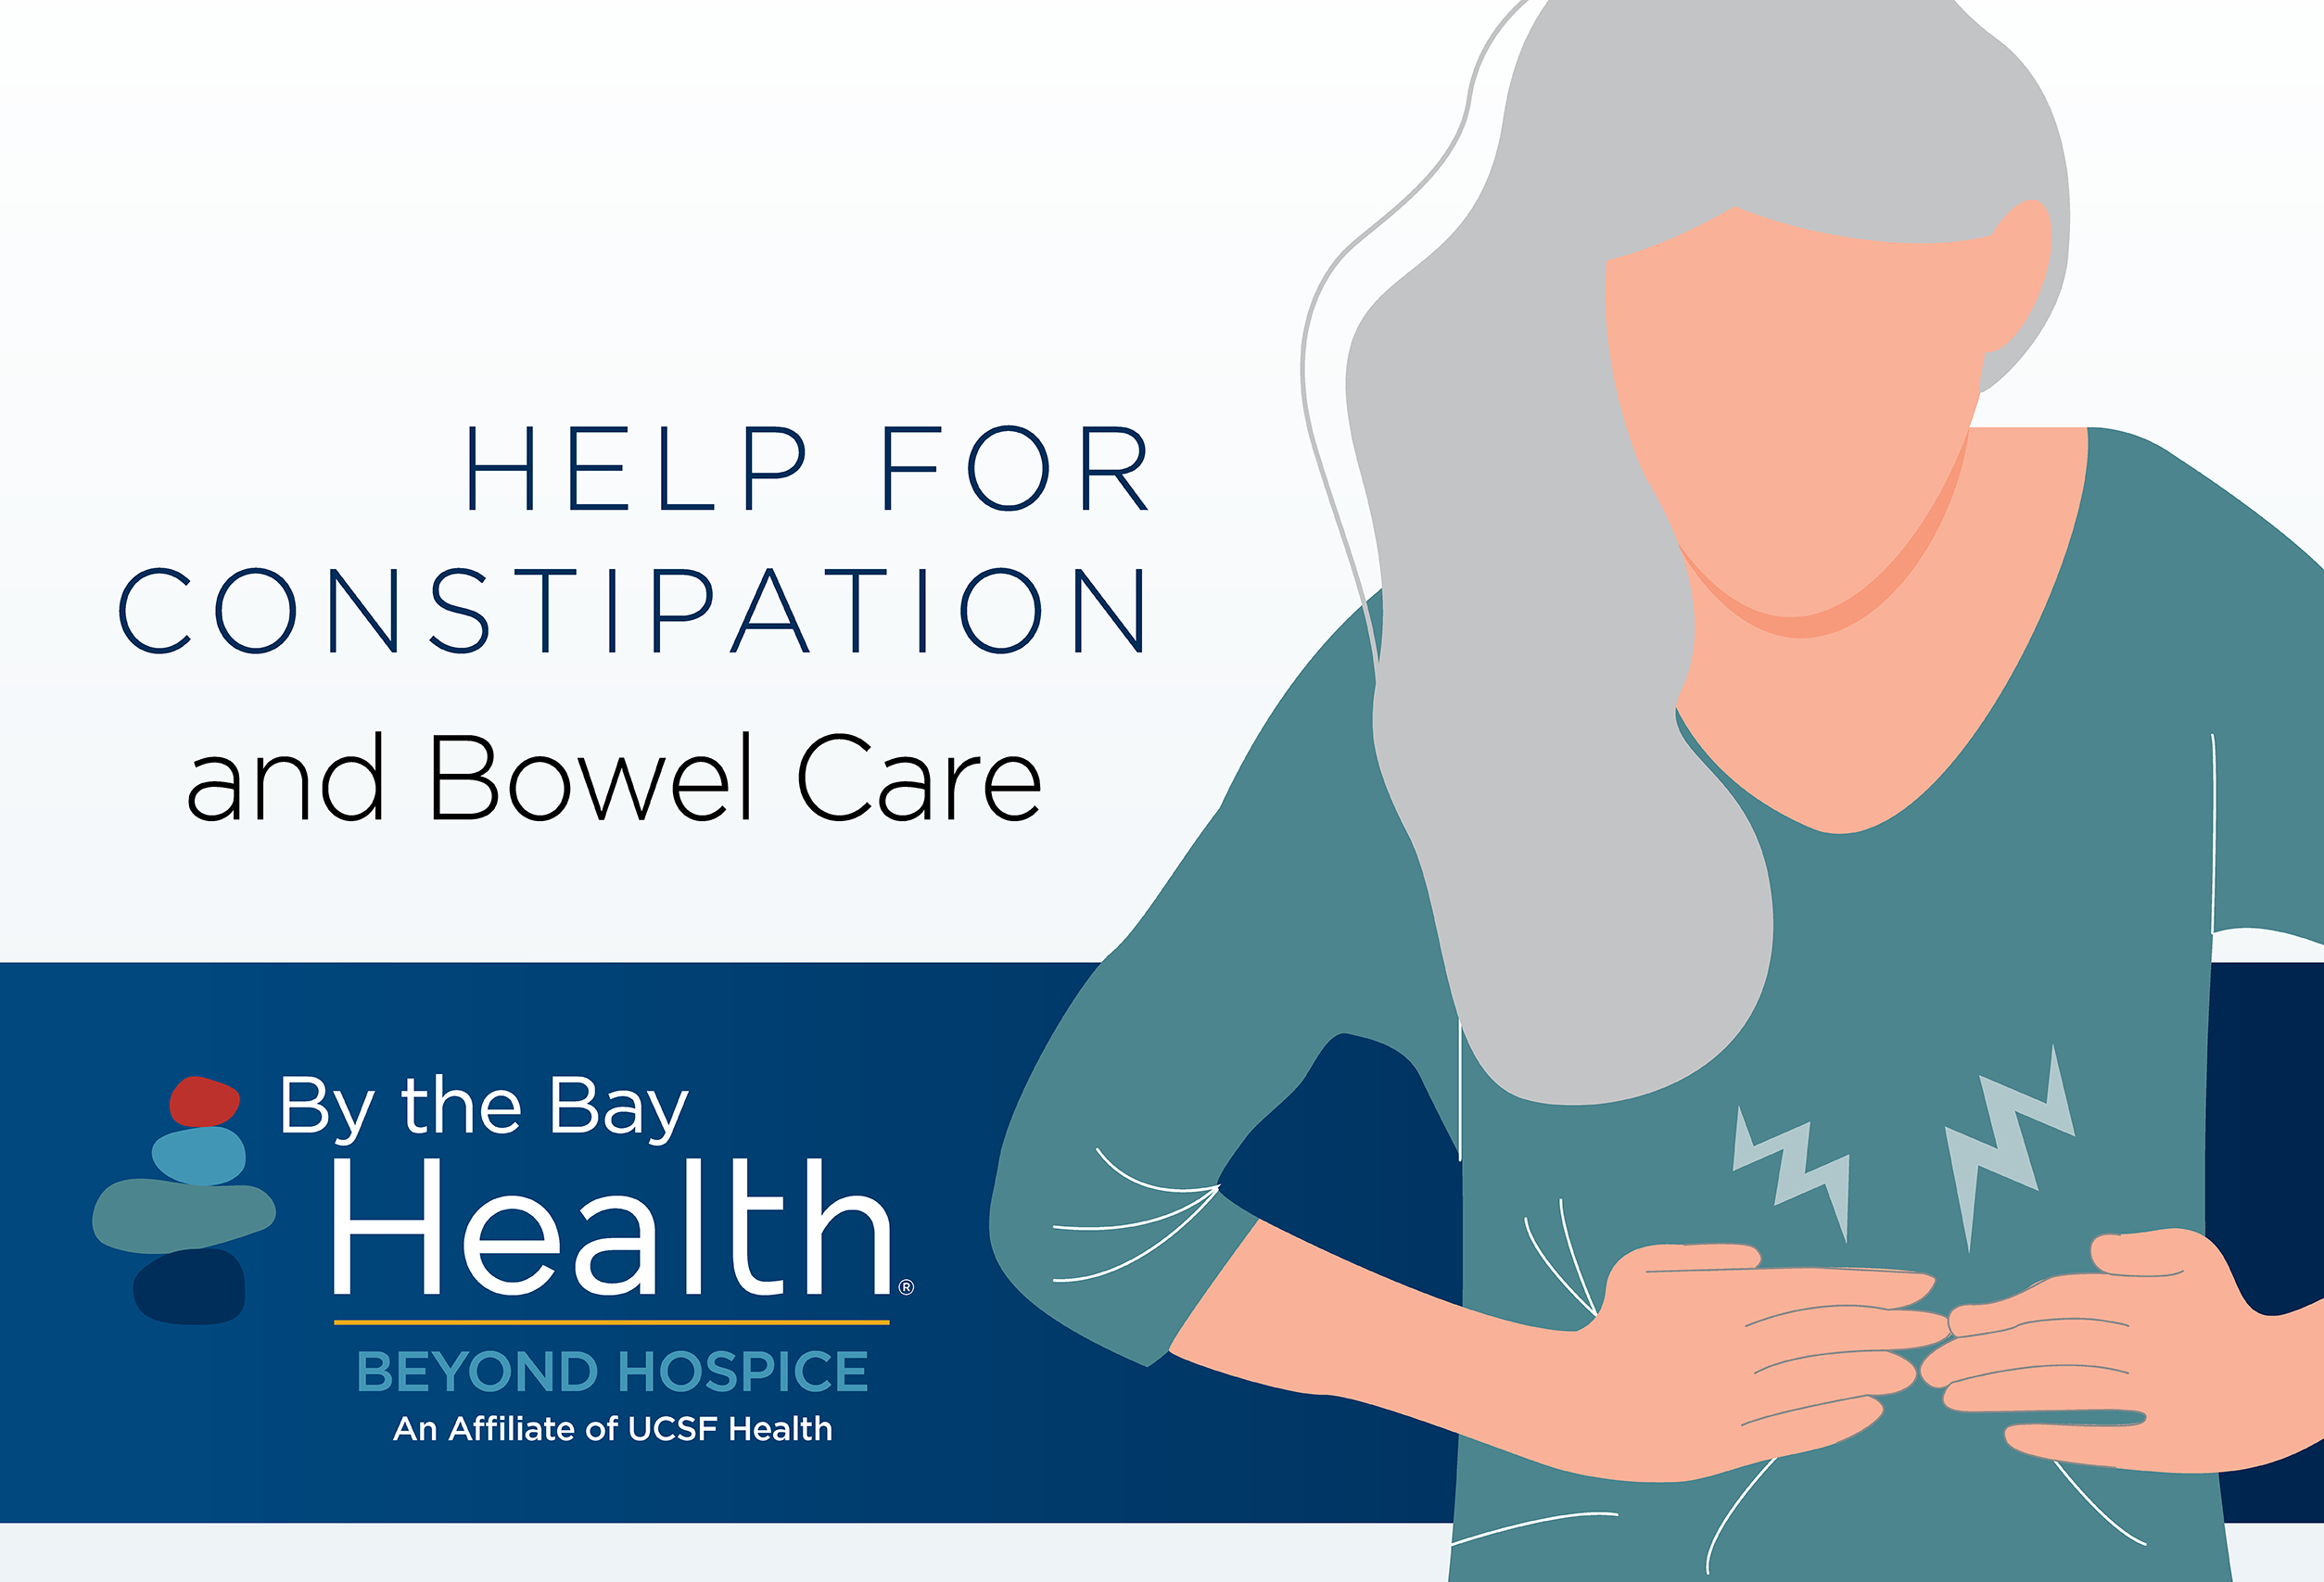 Help for Constipation and Bowel Care